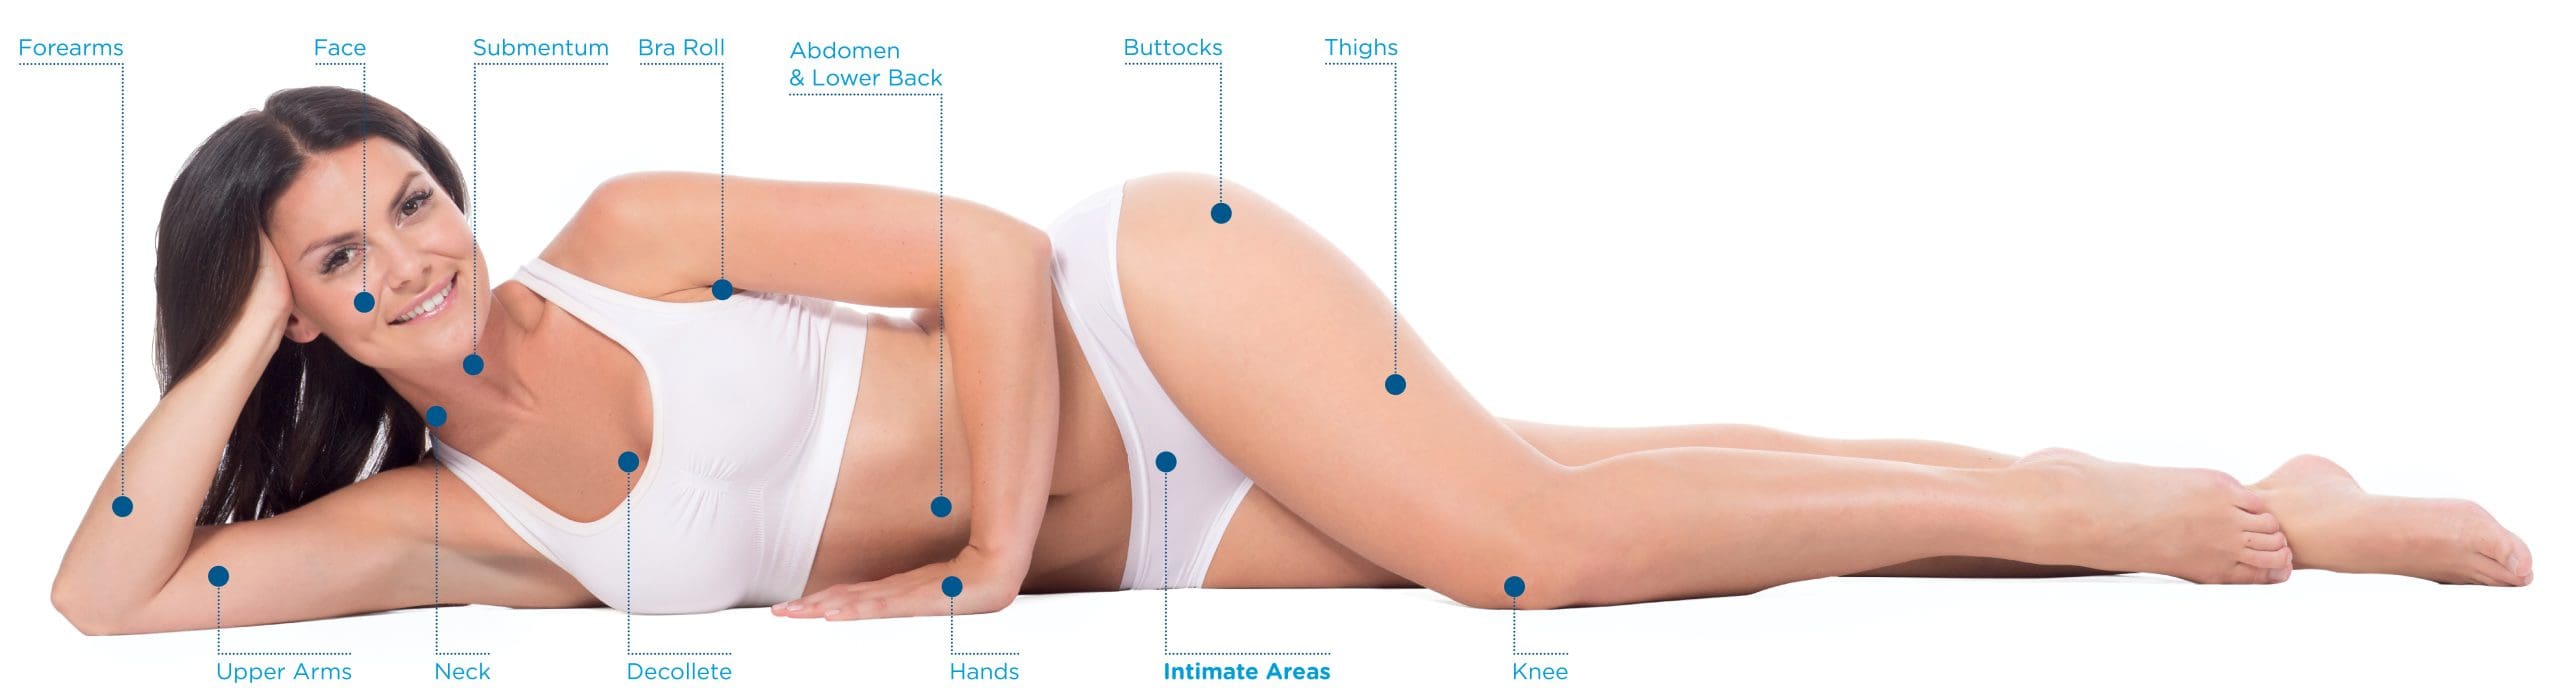 Exilis model with treatment areas